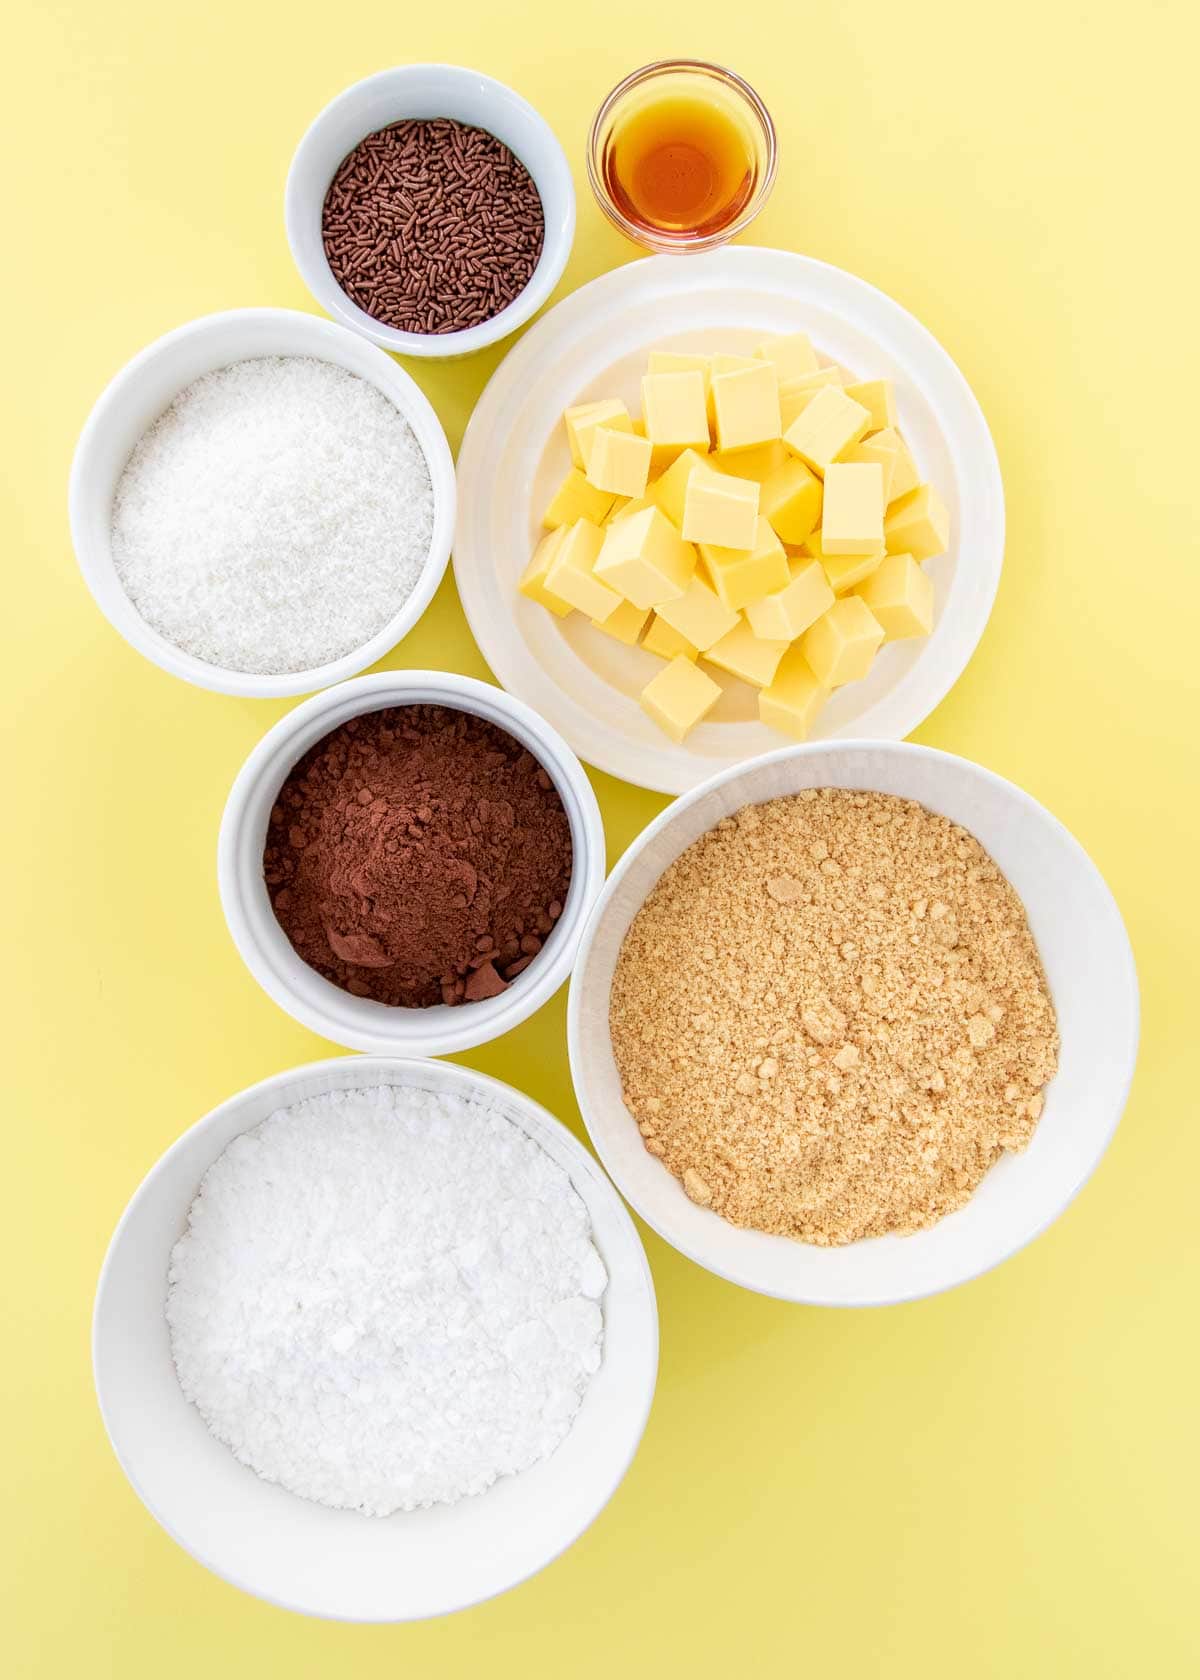 Chocolate coconut truffle ingredients - crushed cookies, icing sugar, butter, cocoa, coconut, vanilla and sprinkles